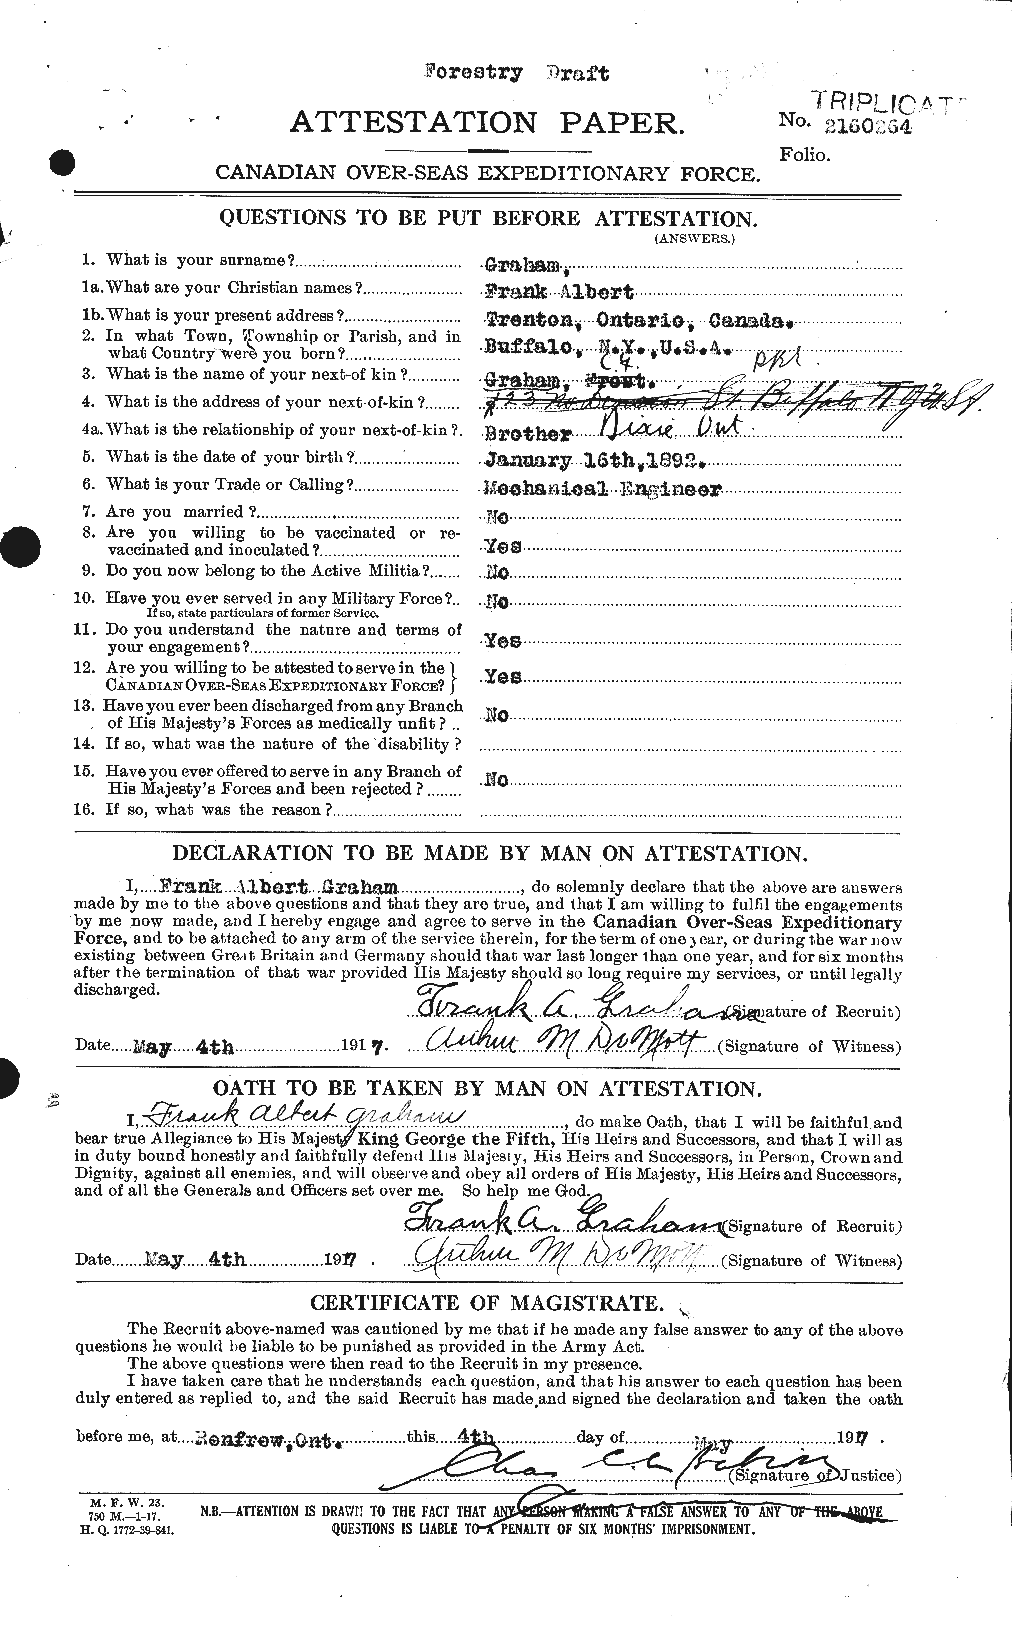 Personnel Records of the First World War - CEF 357588a